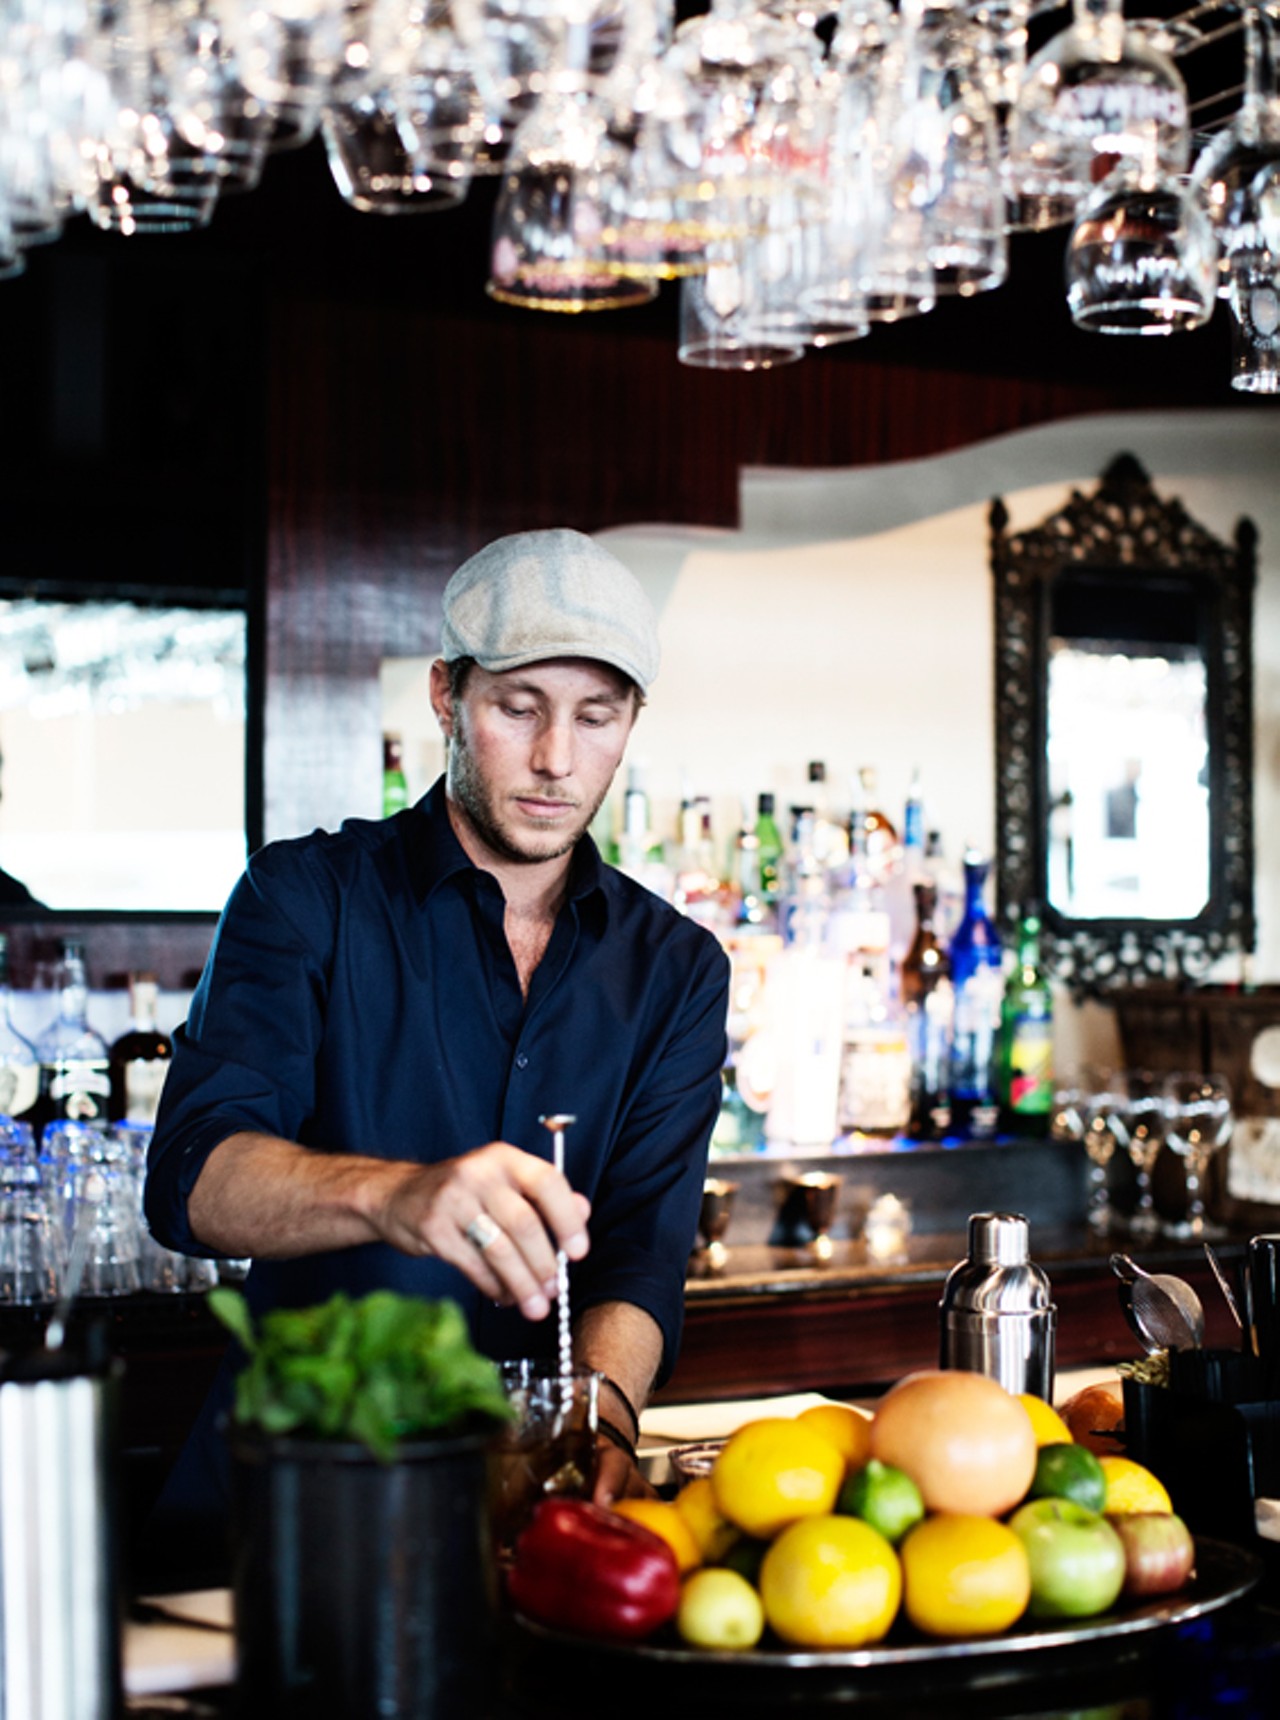 Terry Oliver, one of the owners and the bar manager, behind the bar at Tripel. He's preparing a "Tripel Fashioned."